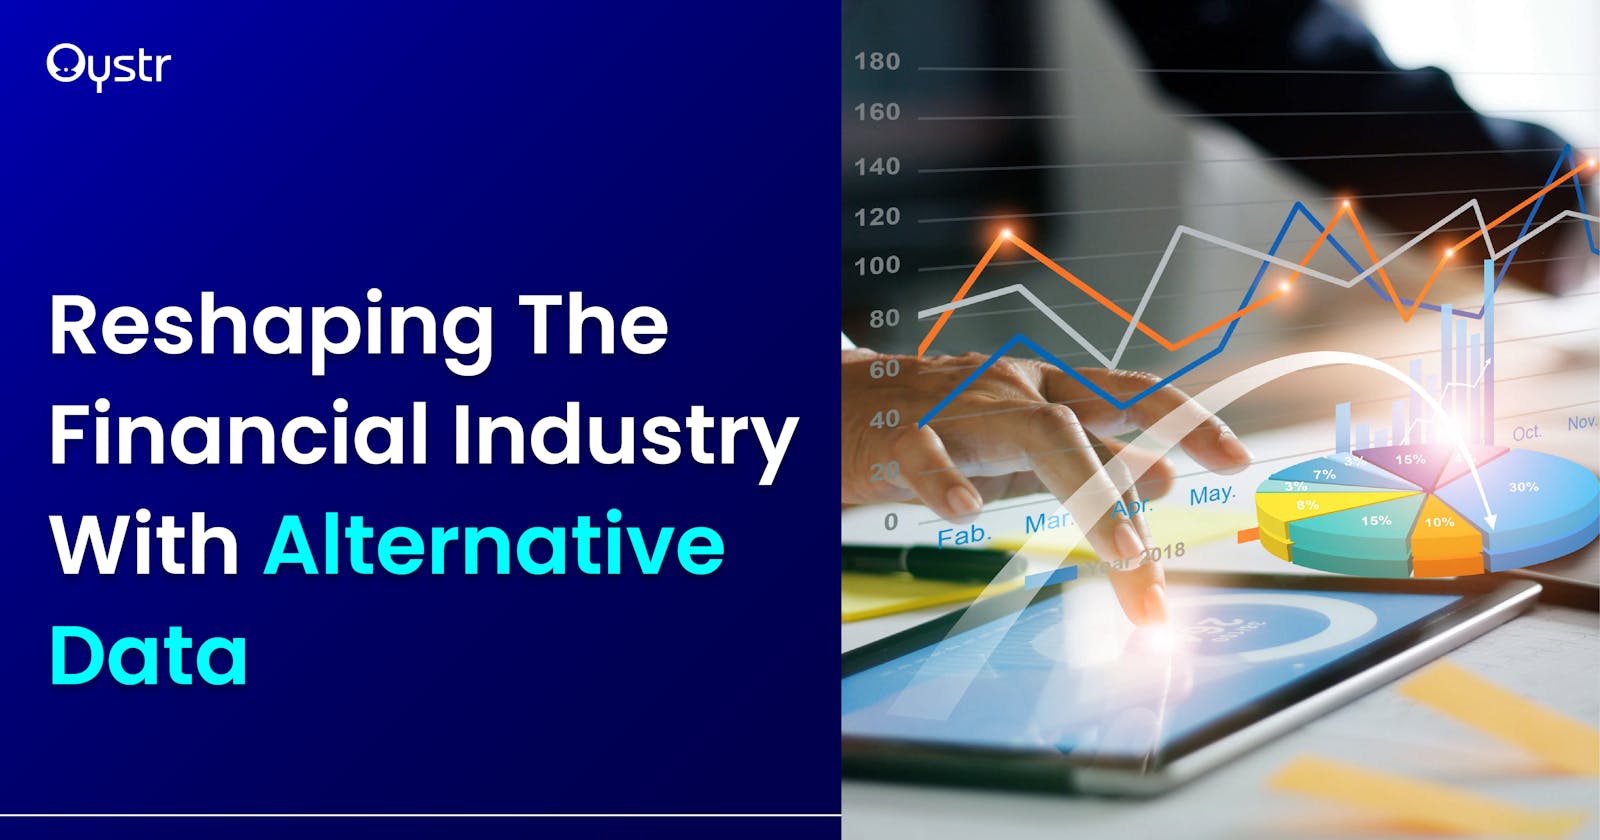 Reshaping The Financial Industry With Alternative Data